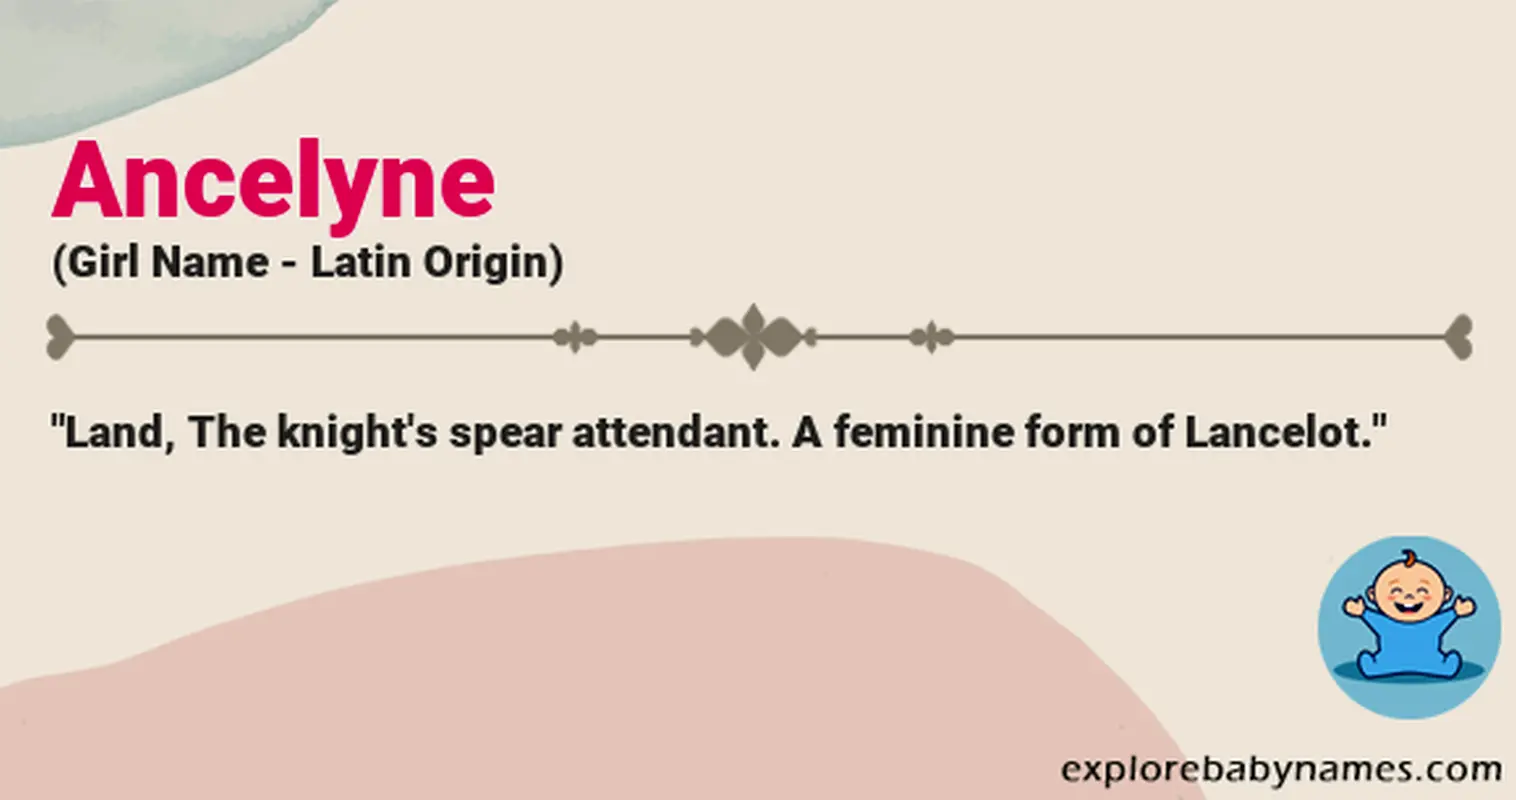 Meaning of Ancelyne